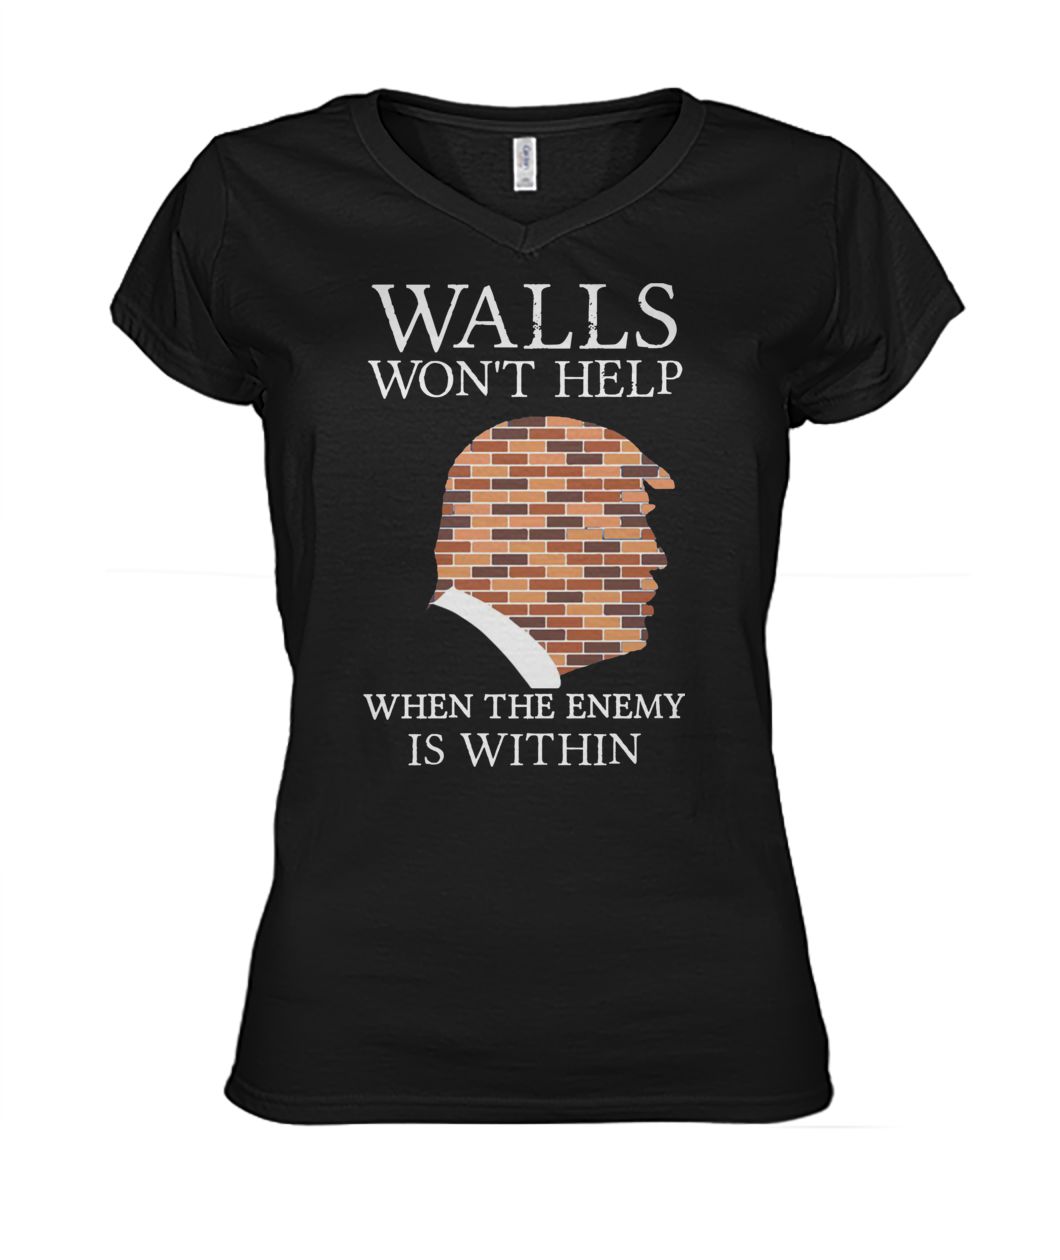 Trump walls won't help when the enemy is within women's v-neck